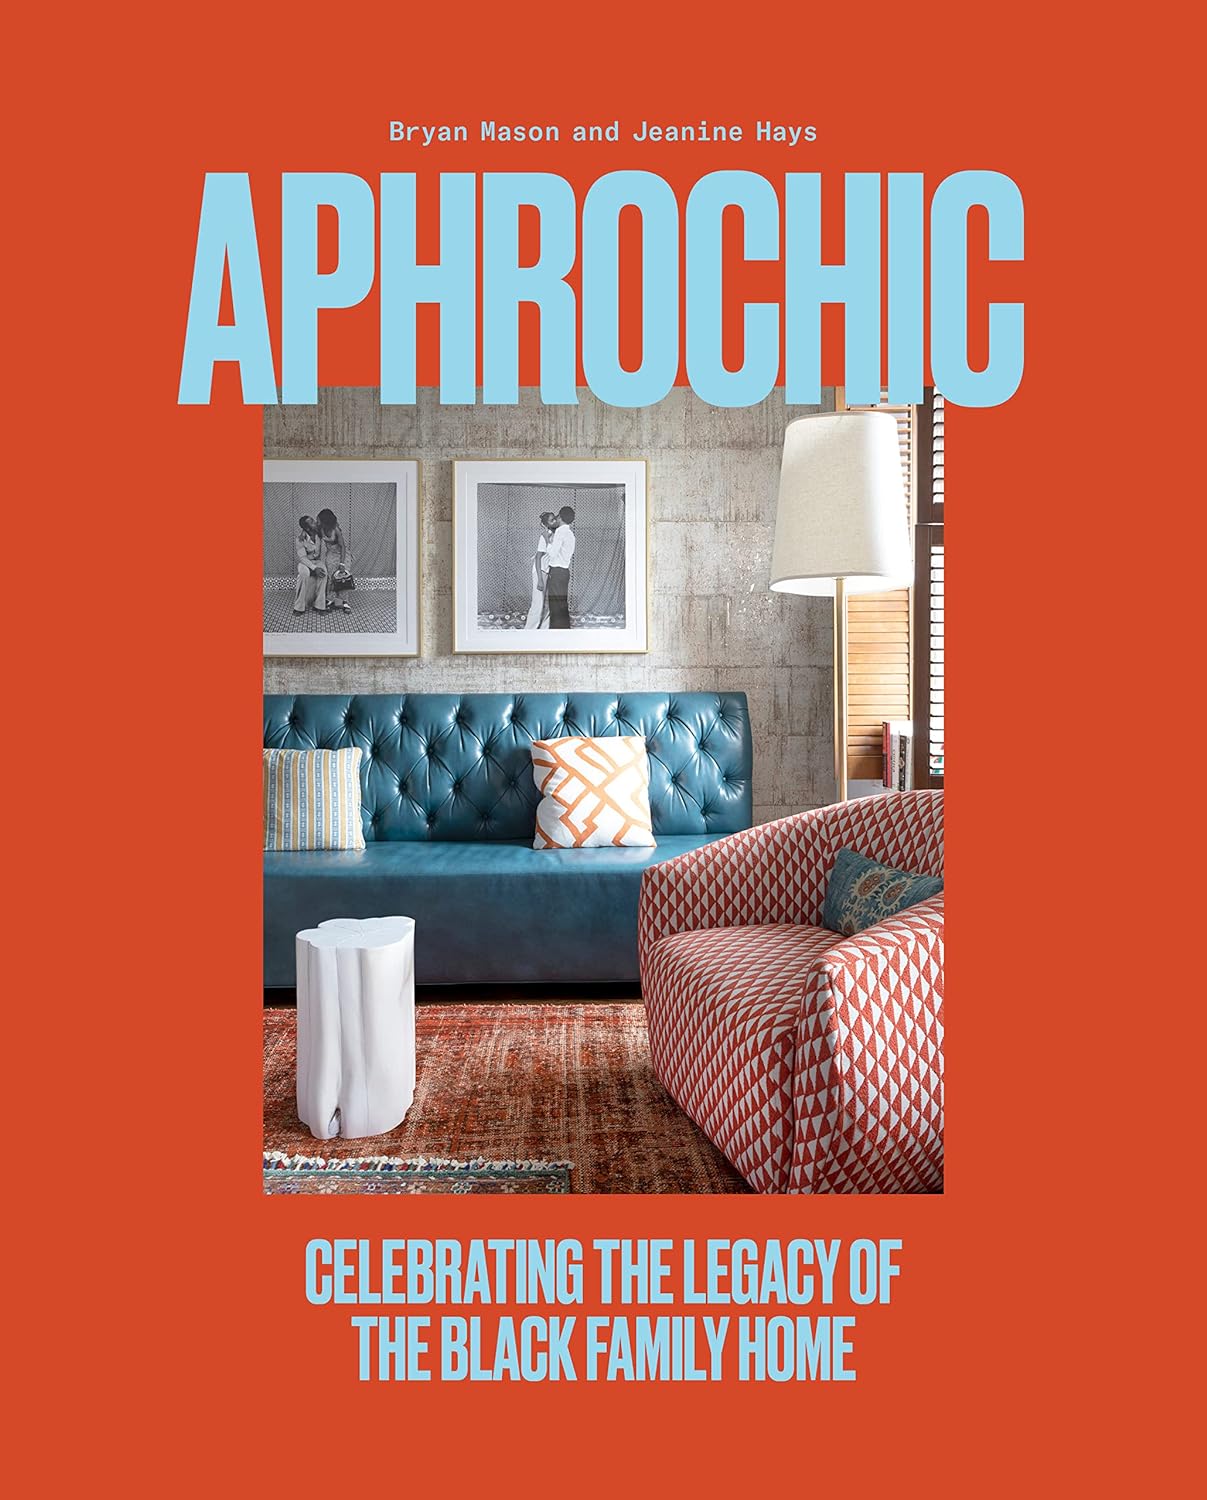 Cover of the book "AphroChic."